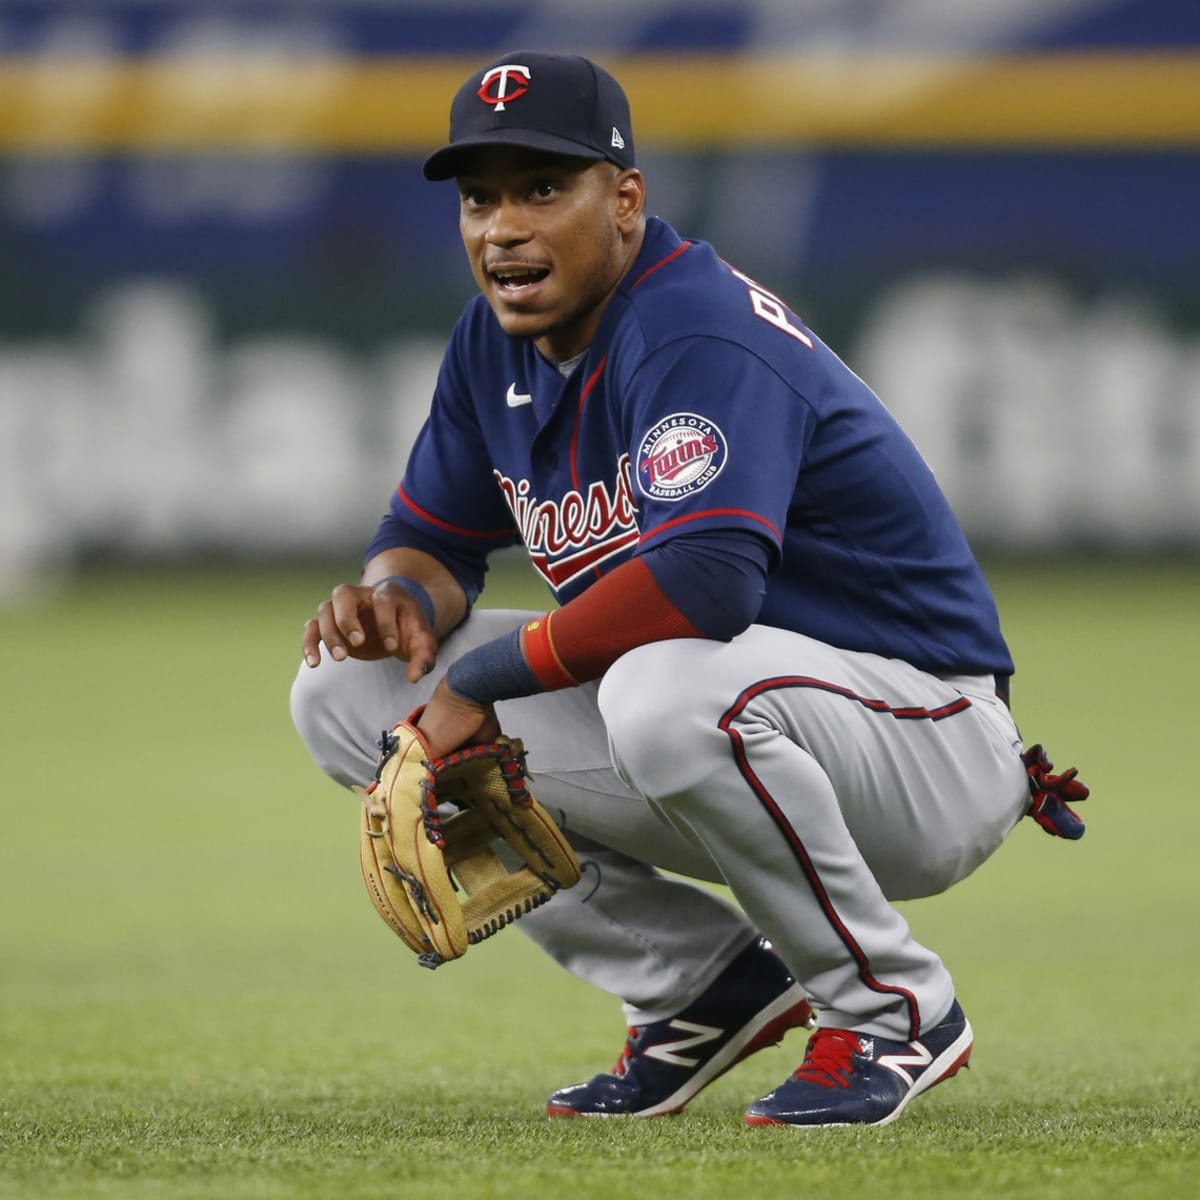 After big hit from Jose Miranda, Twins crumble in 10th inning